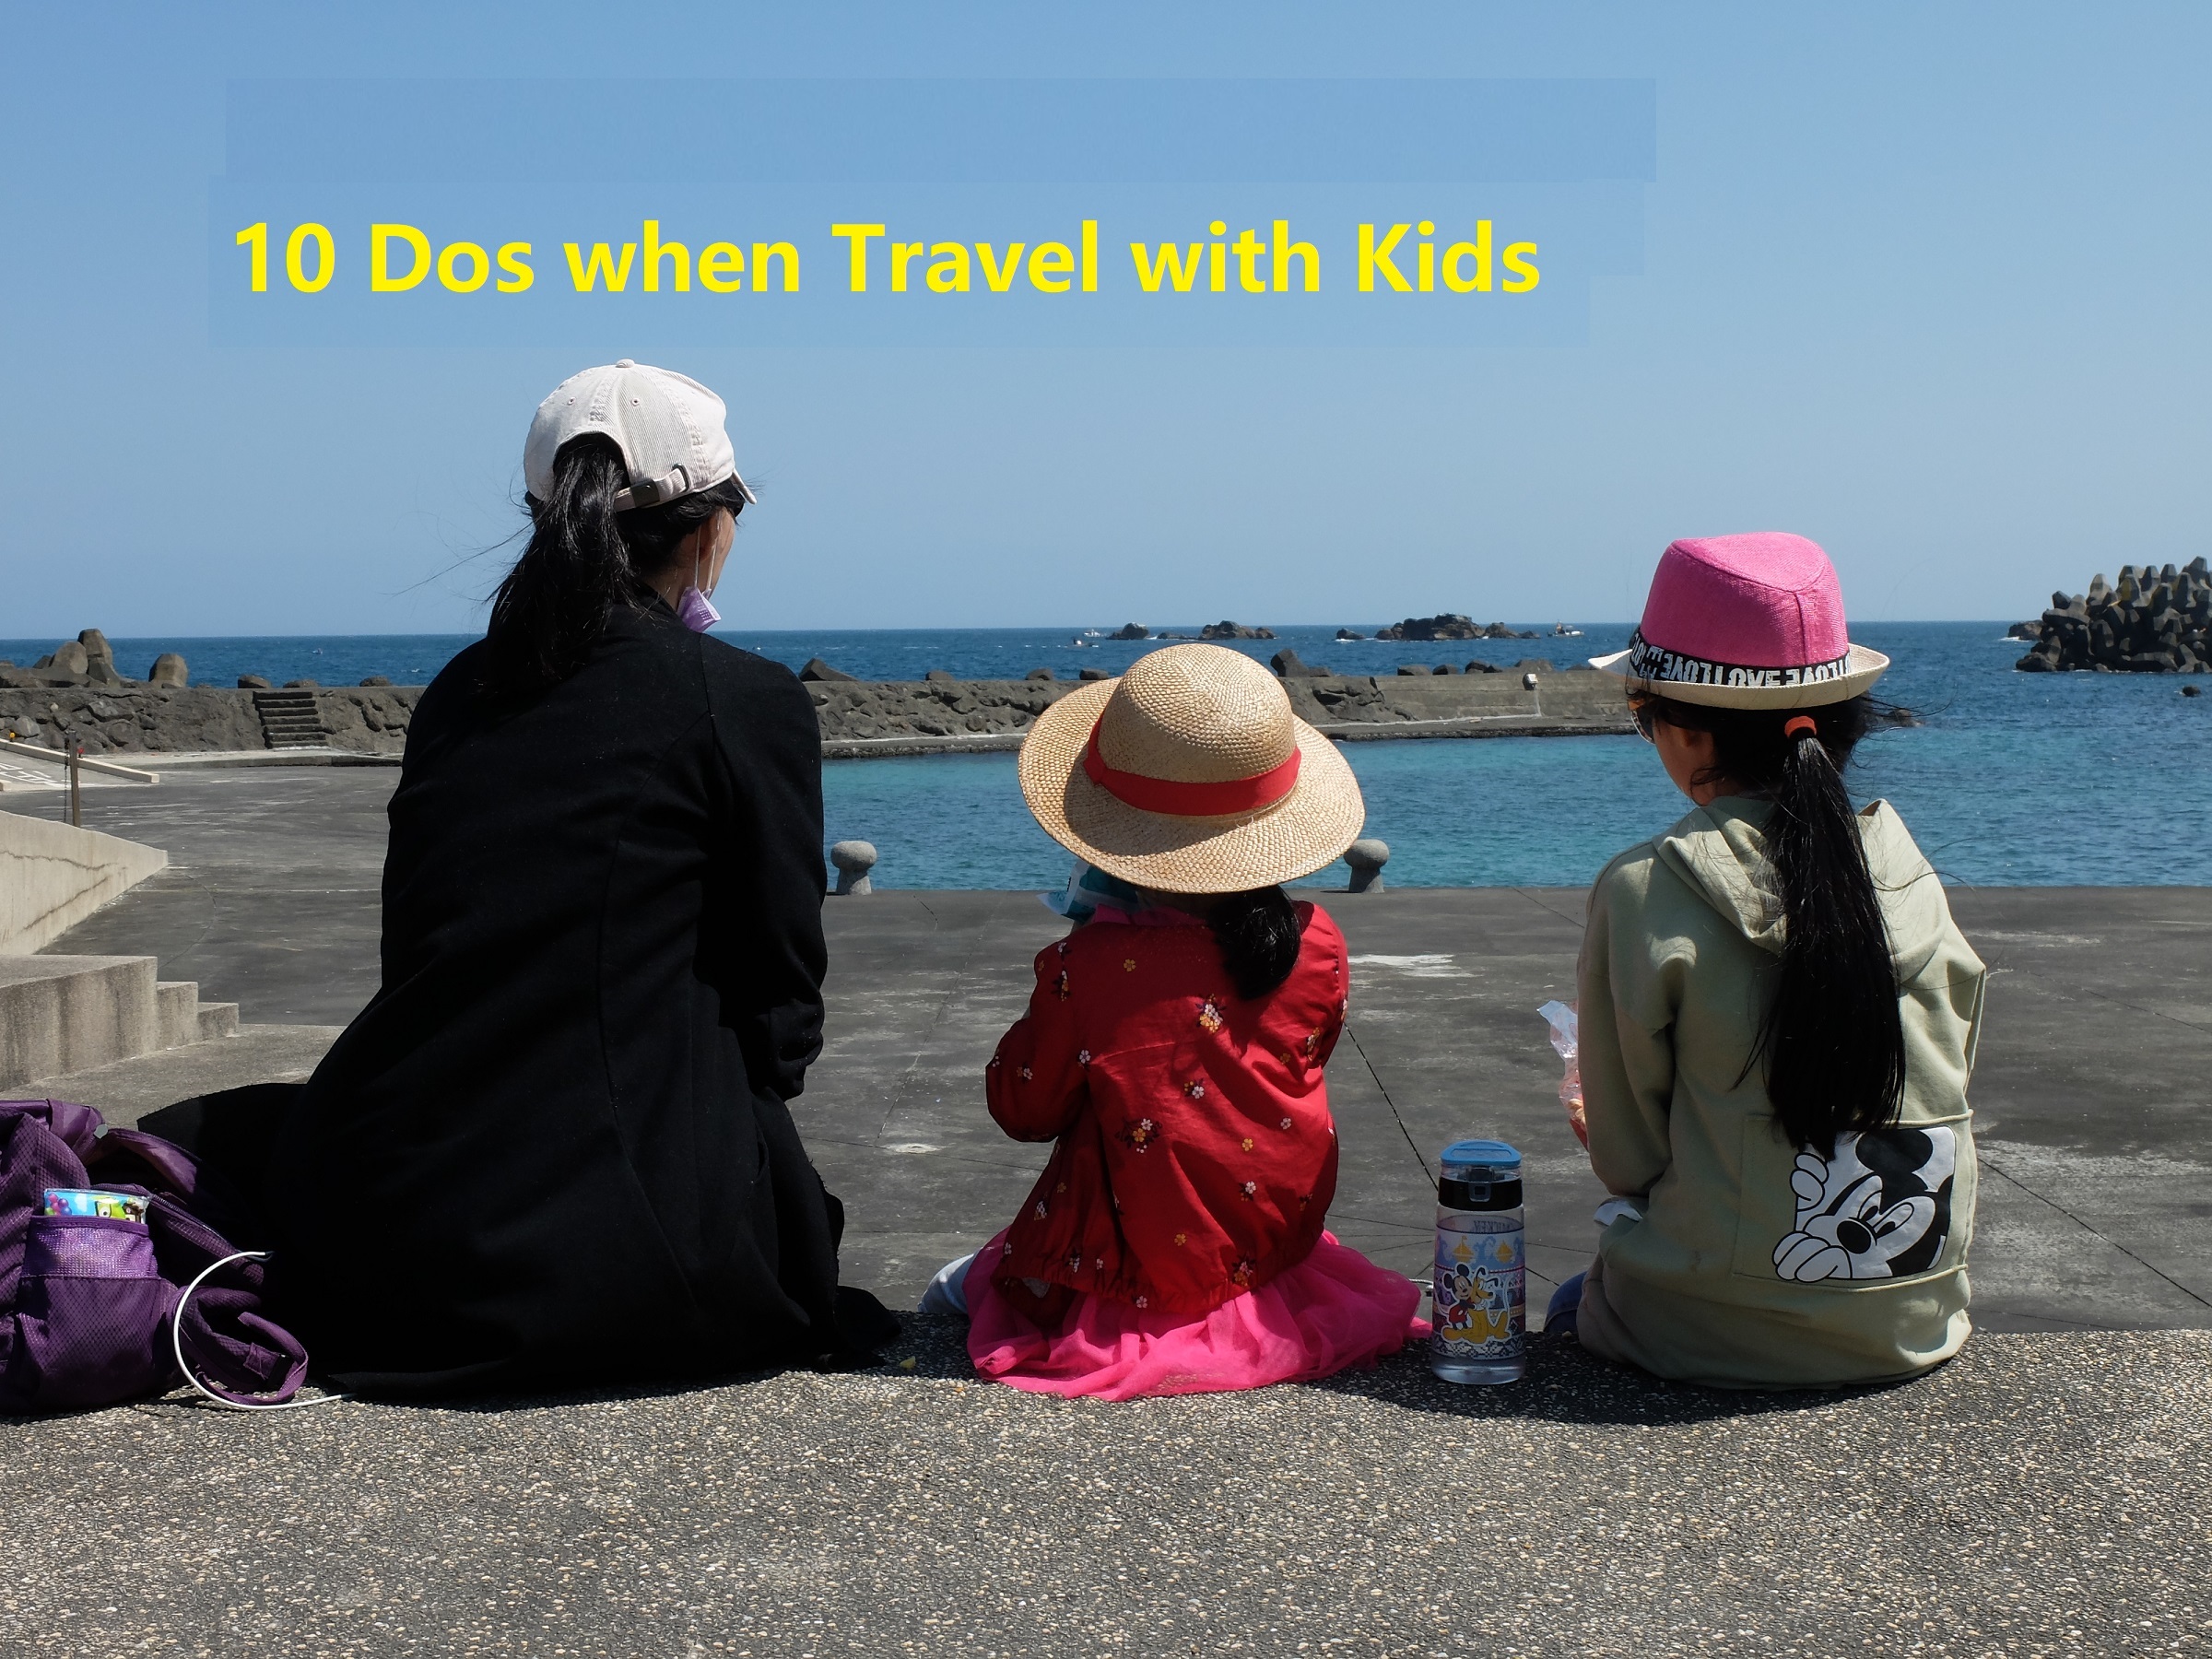 10 Dos when Travel with Kids